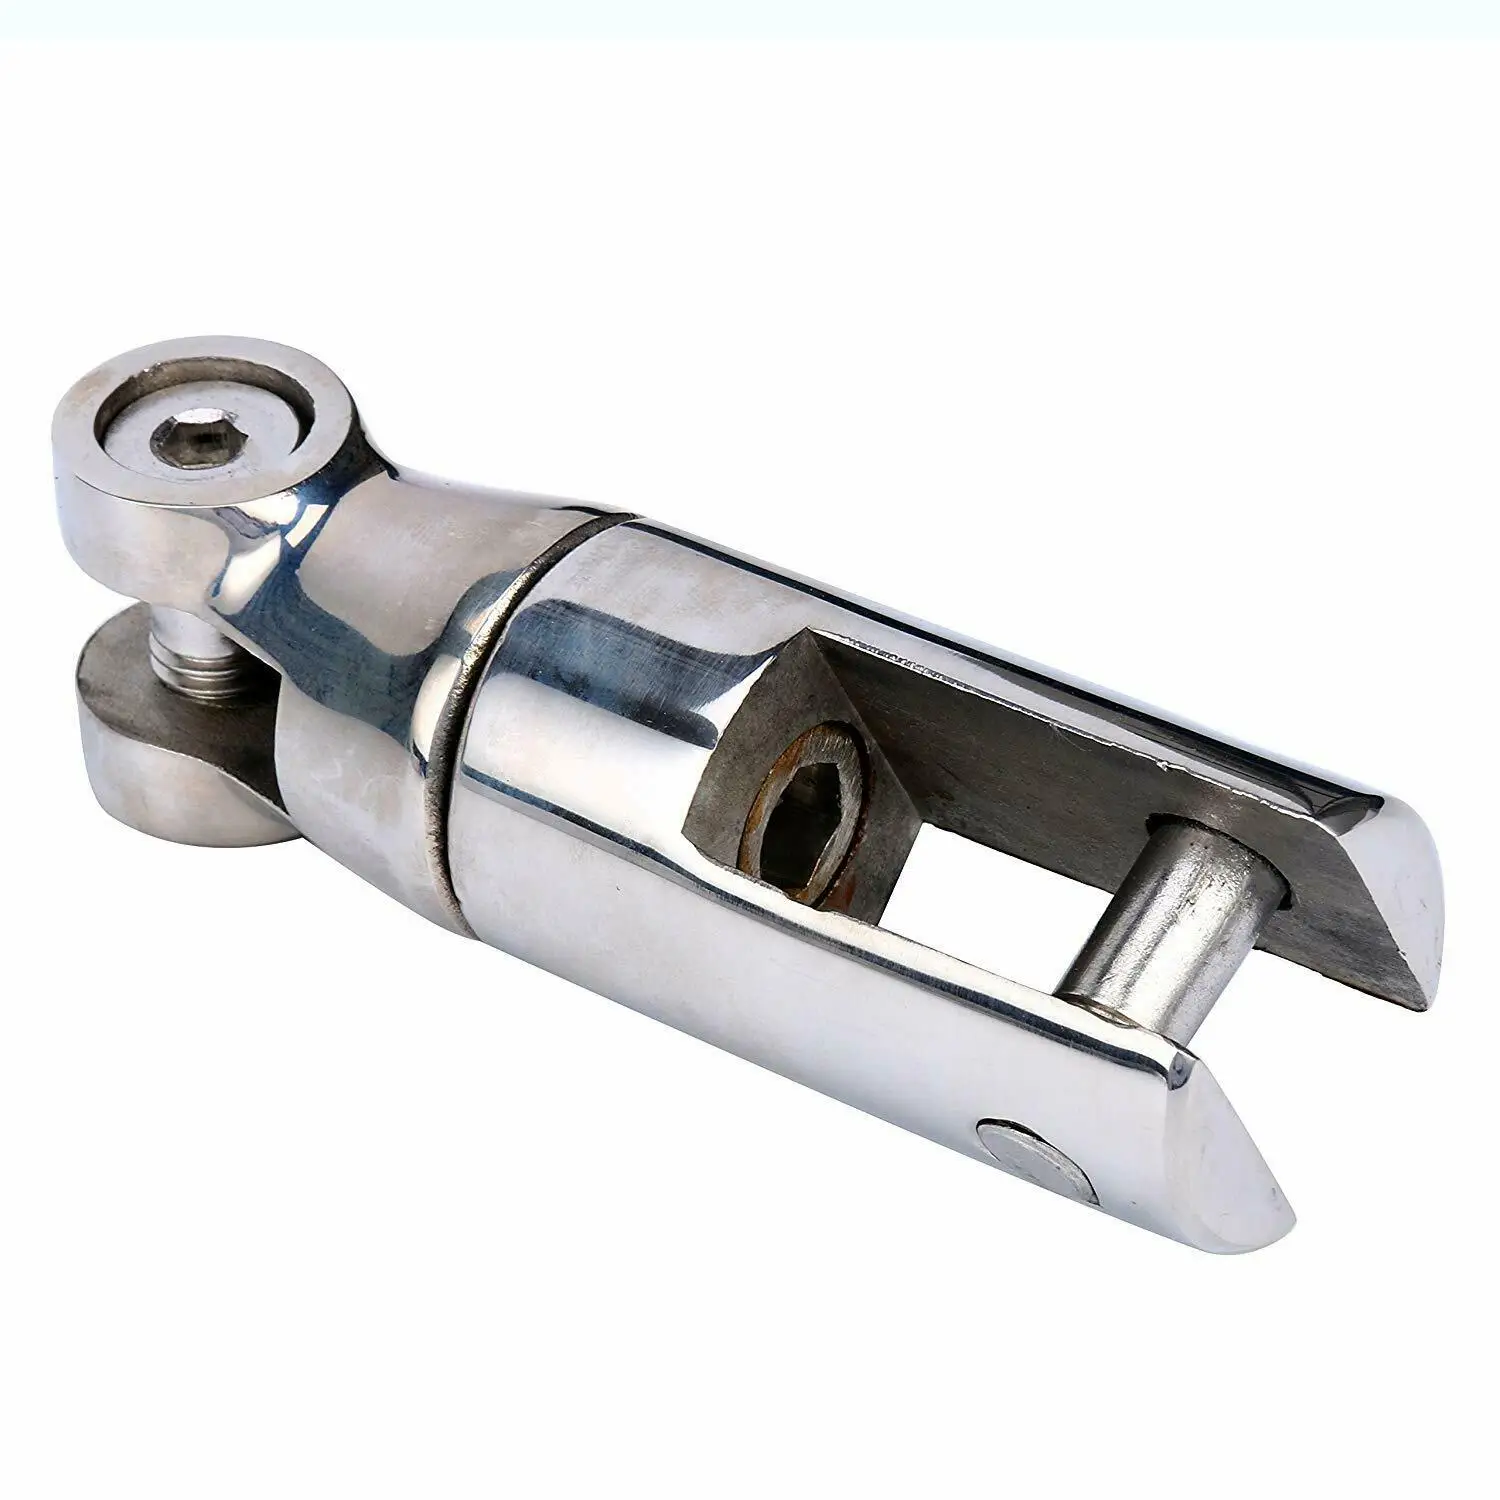 5/16" AISI 316 Stainless Steel Boat Marine Anchor Double Swivel Connector 1/4" 